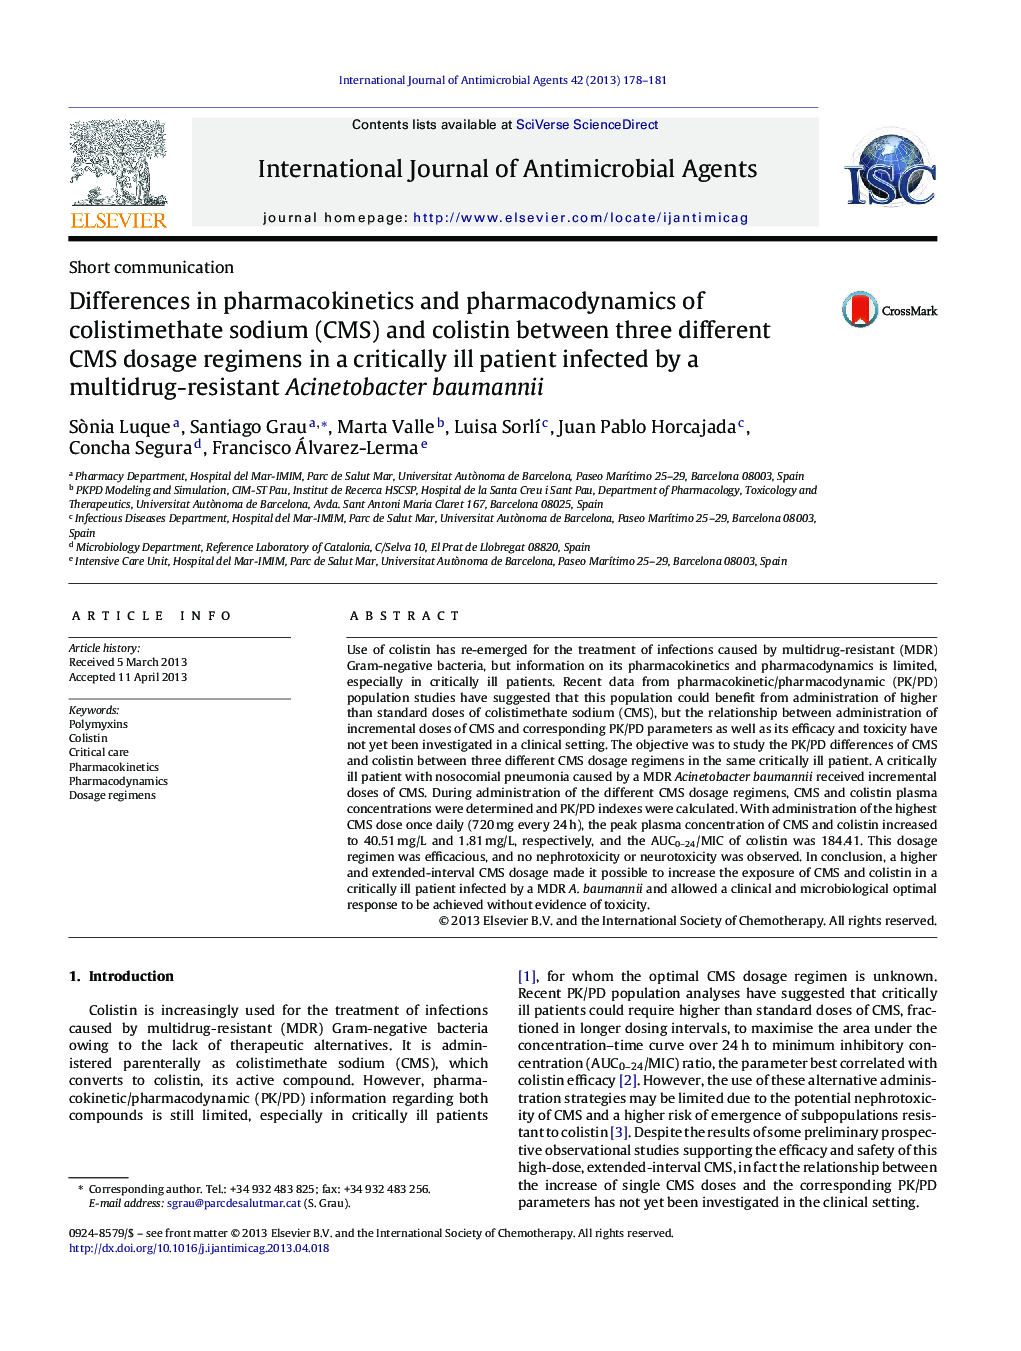 Differences in pharmacokinetics and pharmacodynamics of colistimethate sodium (CMS) and colistin between three different CMS dosage regimens in a critically ill patient infected by a multidrug-resistant Acinetobacter baumannii